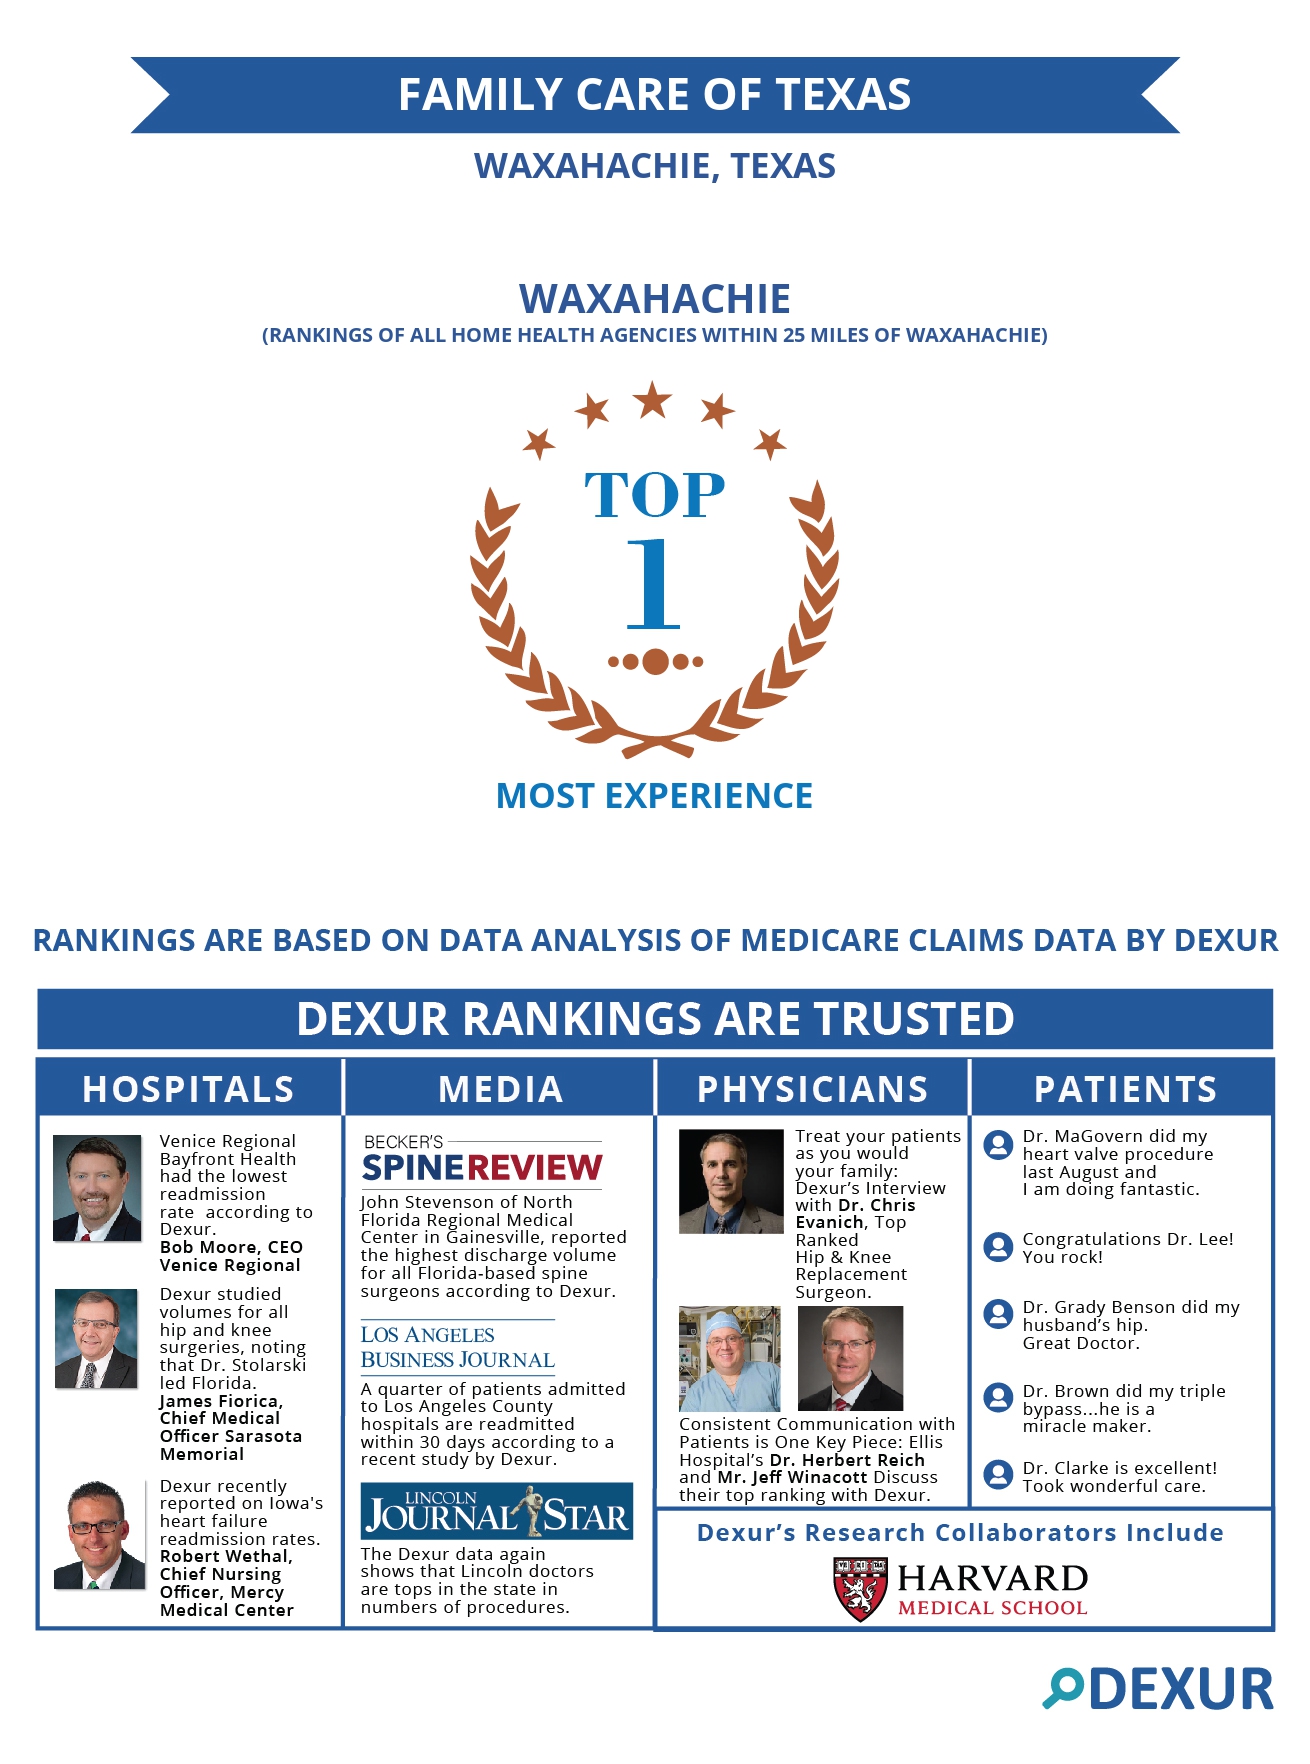 Family Care Of Texas Is Among The Top Ranked Home Health Agencies Within 25 Miles From Waxahachie Tx Based On Case Volume